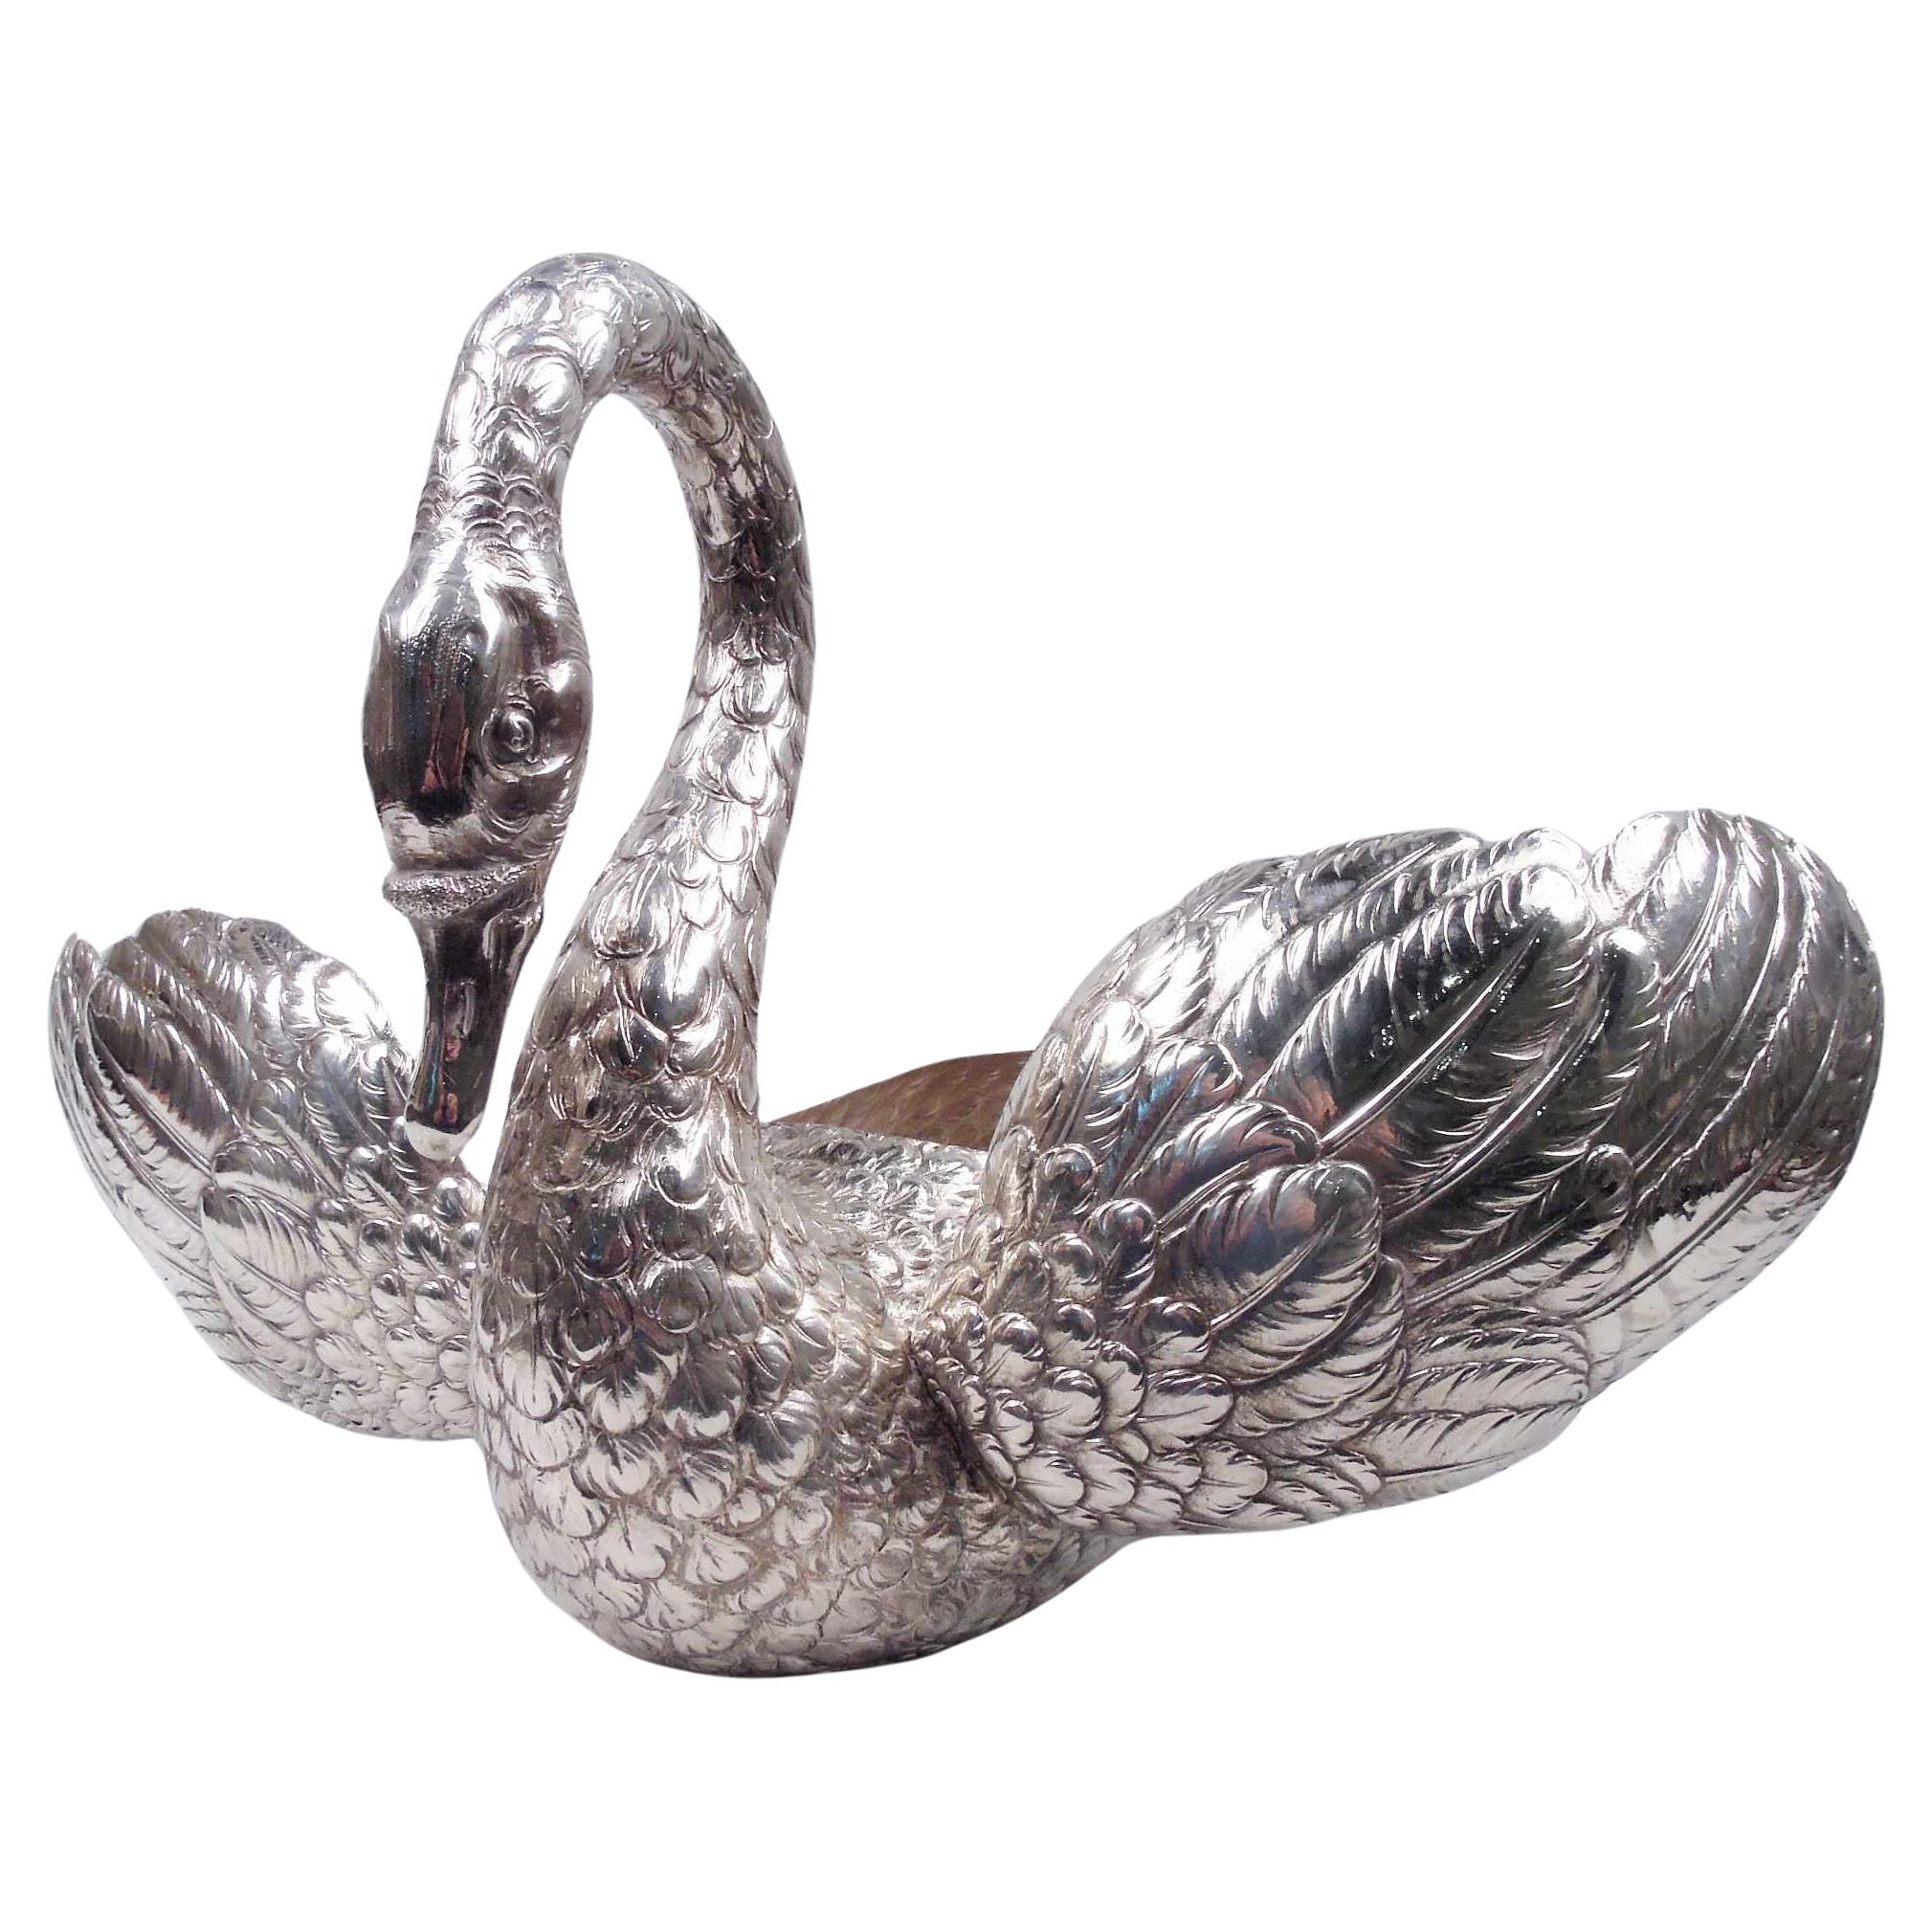 Big & Beautiful German Silver Centerpiece Swan with Wide Wingspan For Sale